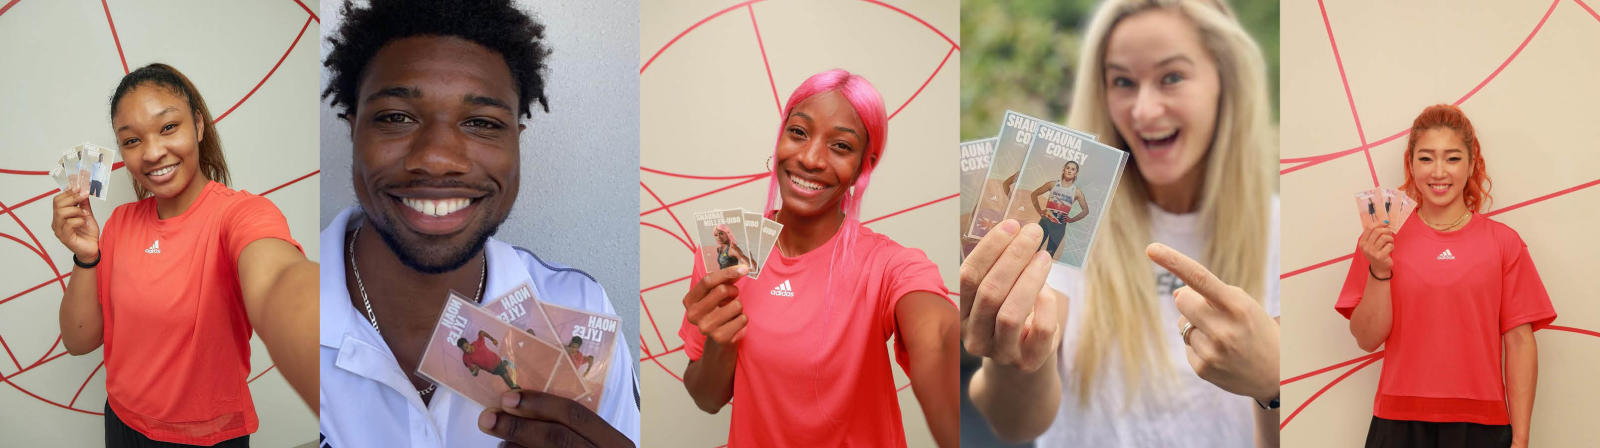 Athletes introduce their trading cards on social networking sites.